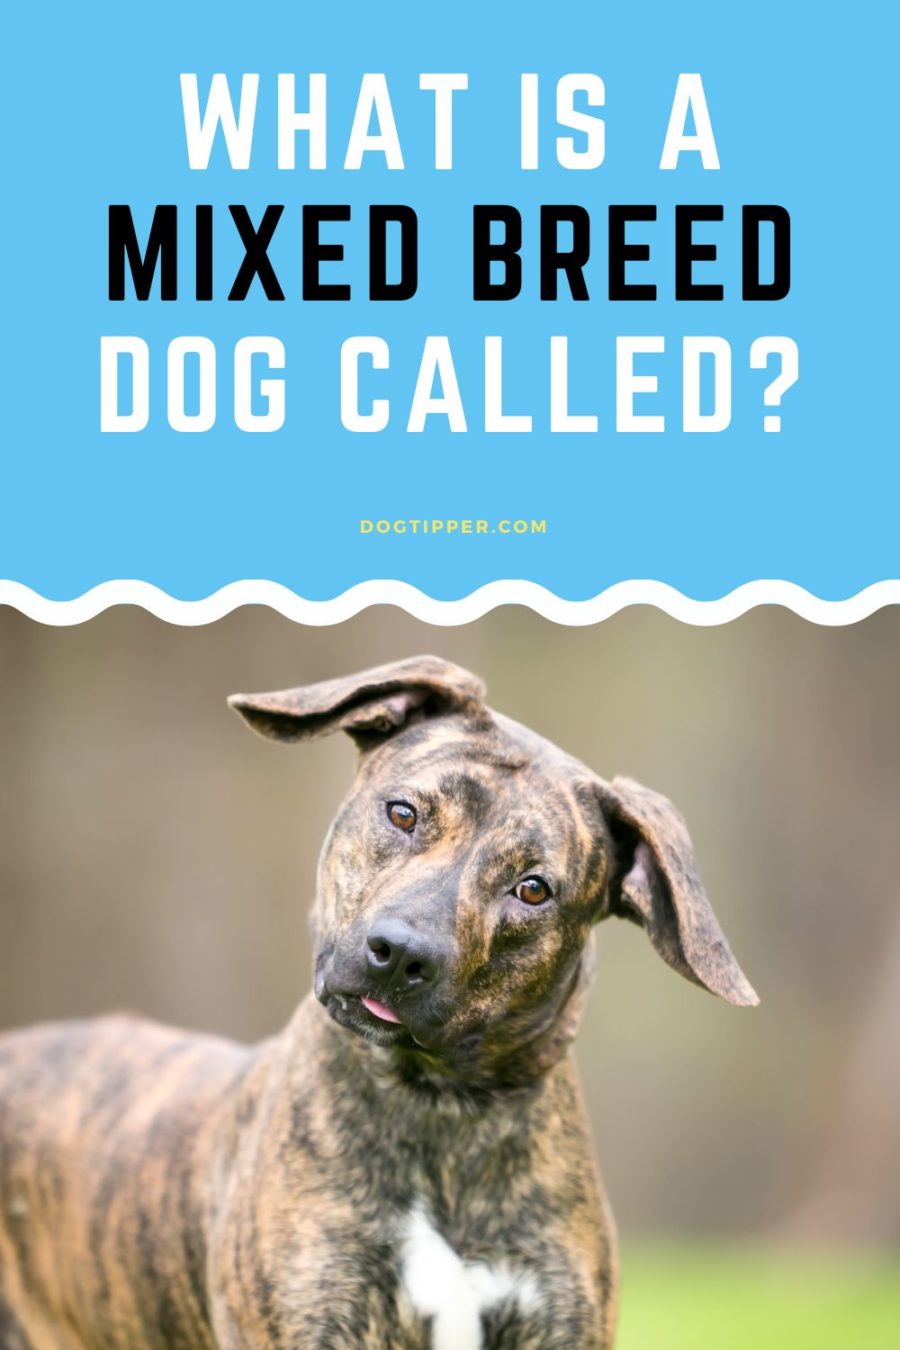 What is a Mixed Breed Dog Called?